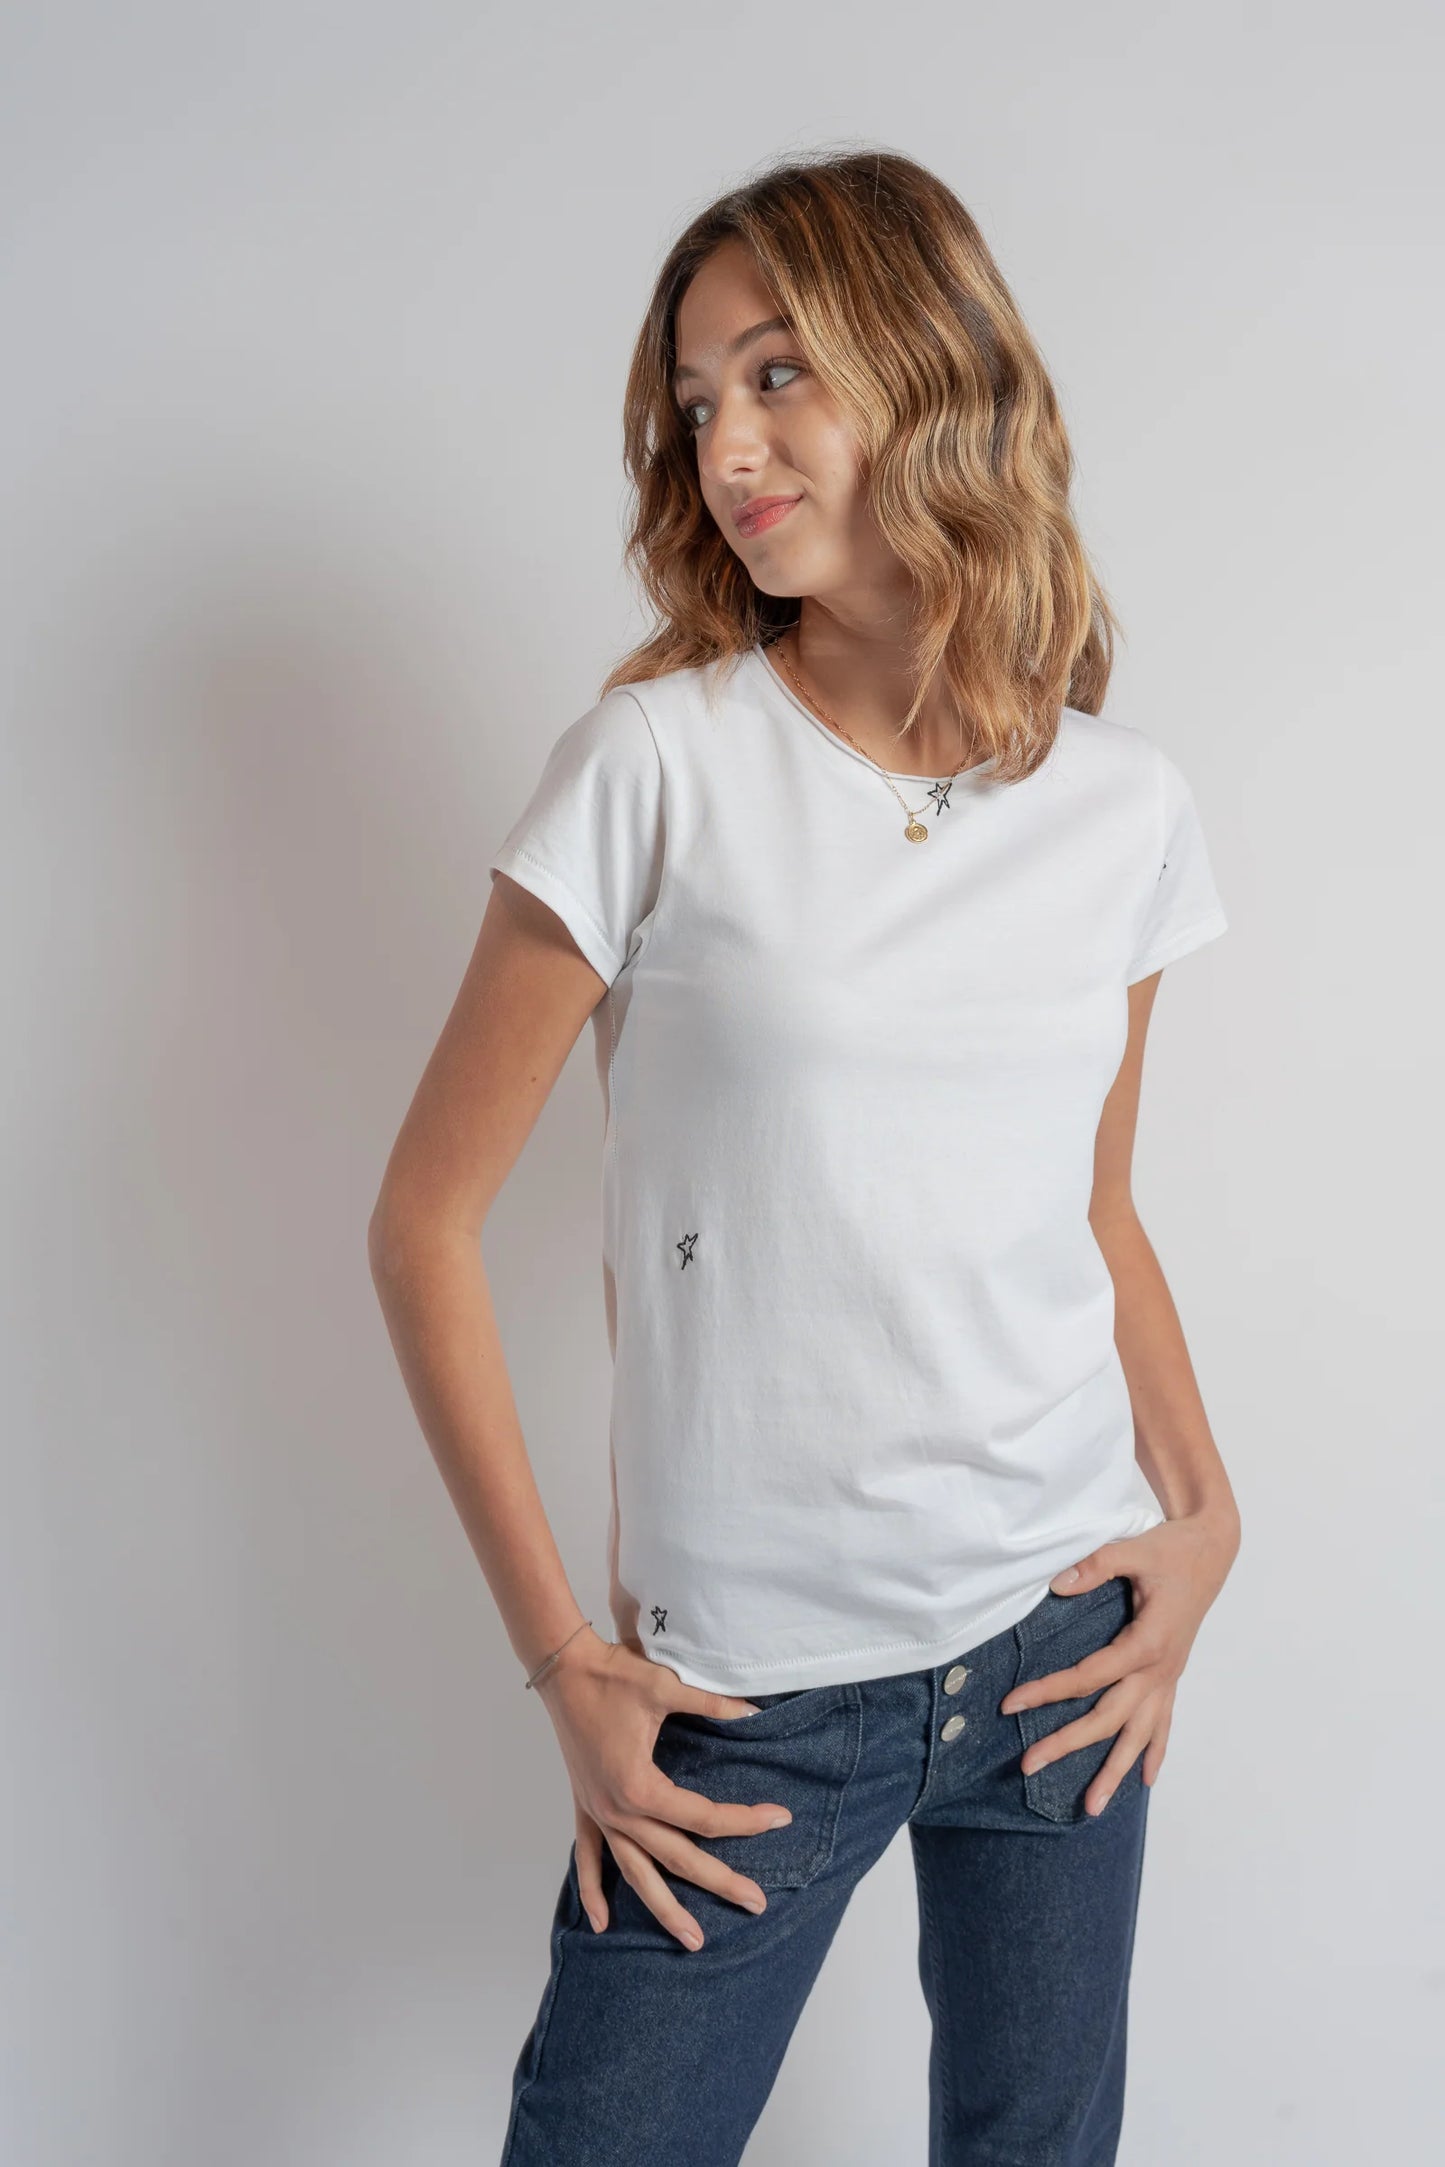 Embroidered Cotton T-Shirt